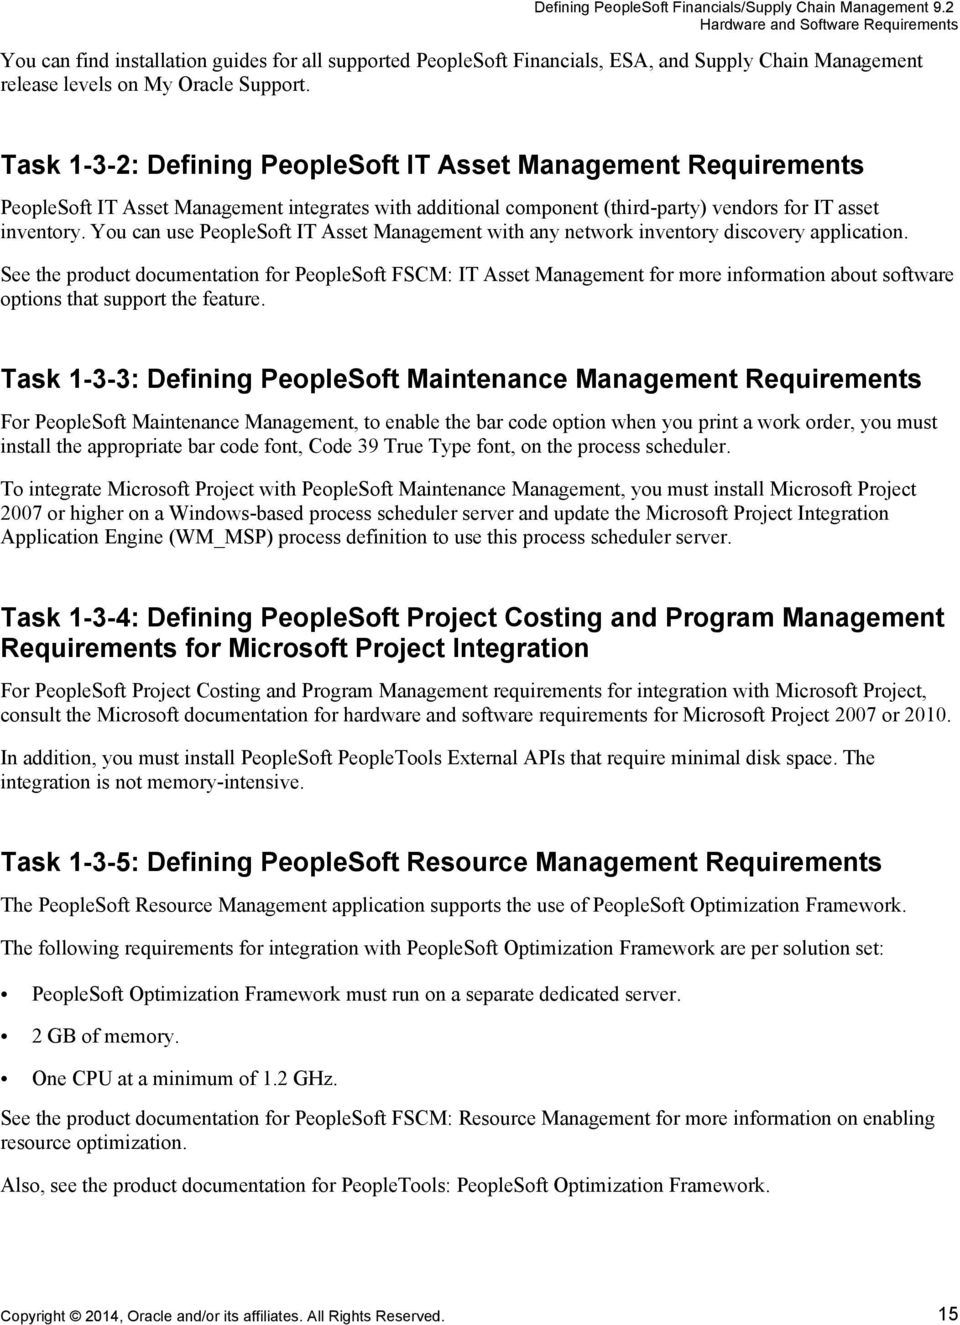 Task 1-3-2: Defining PeopleSoft IT Asset Management Requirements PeopleSoft IT Asset Management integrates with additional component (third-party) vendors for IT asset inventory.